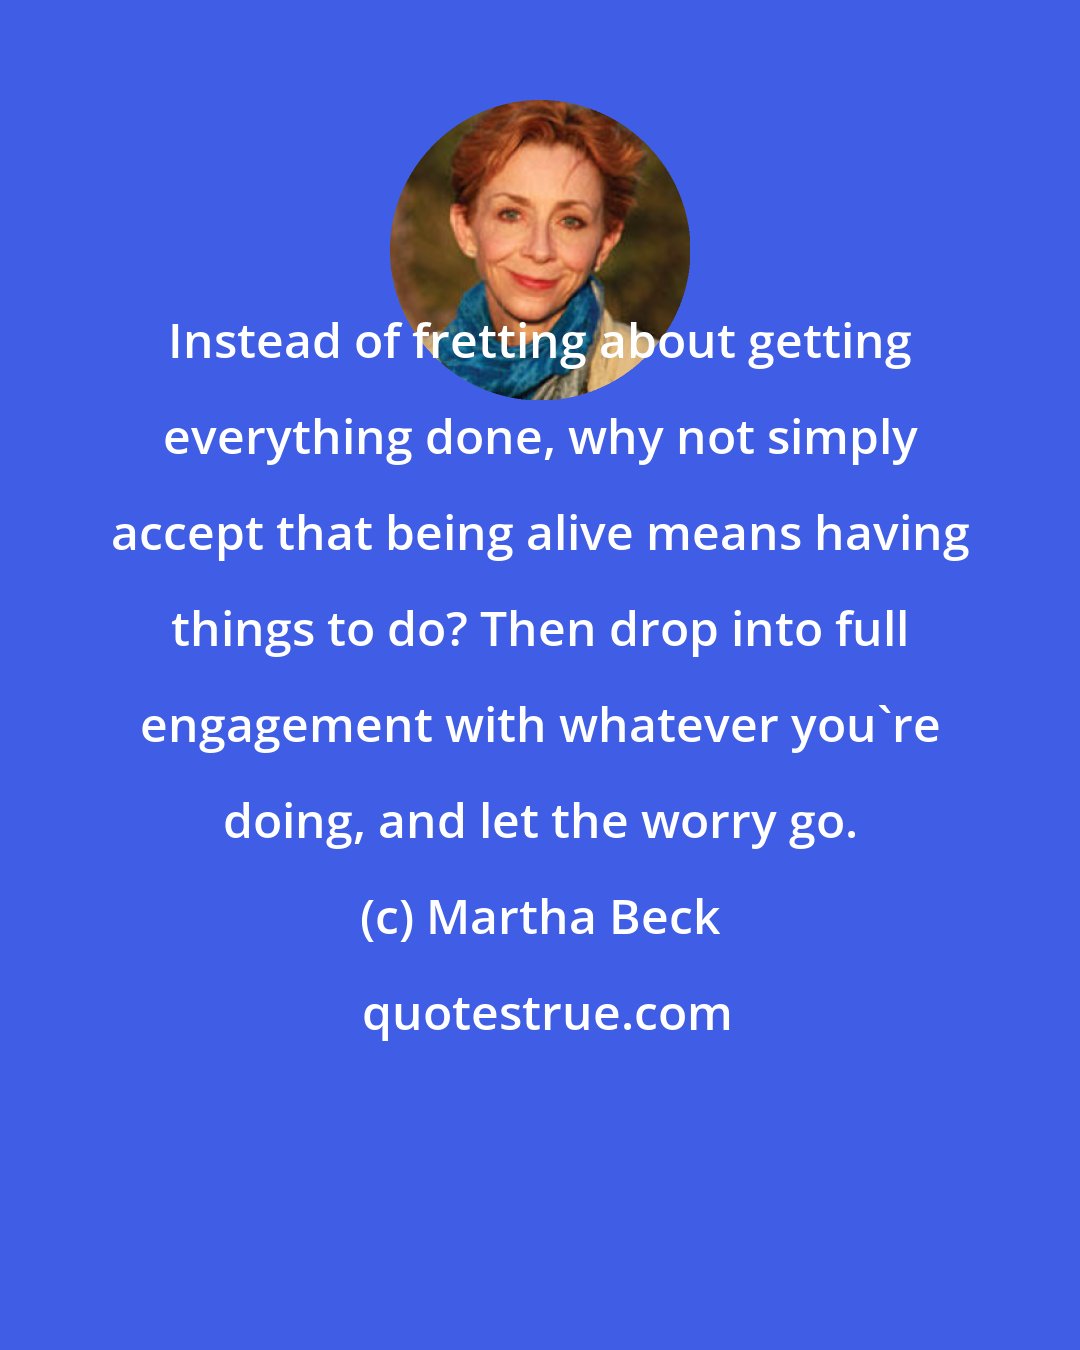 Martha Beck: Instead of fretting about getting everything done, why not simply accept that being alive means having things to do? Then drop into full engagement with whatever you're doing, and let the worry go.